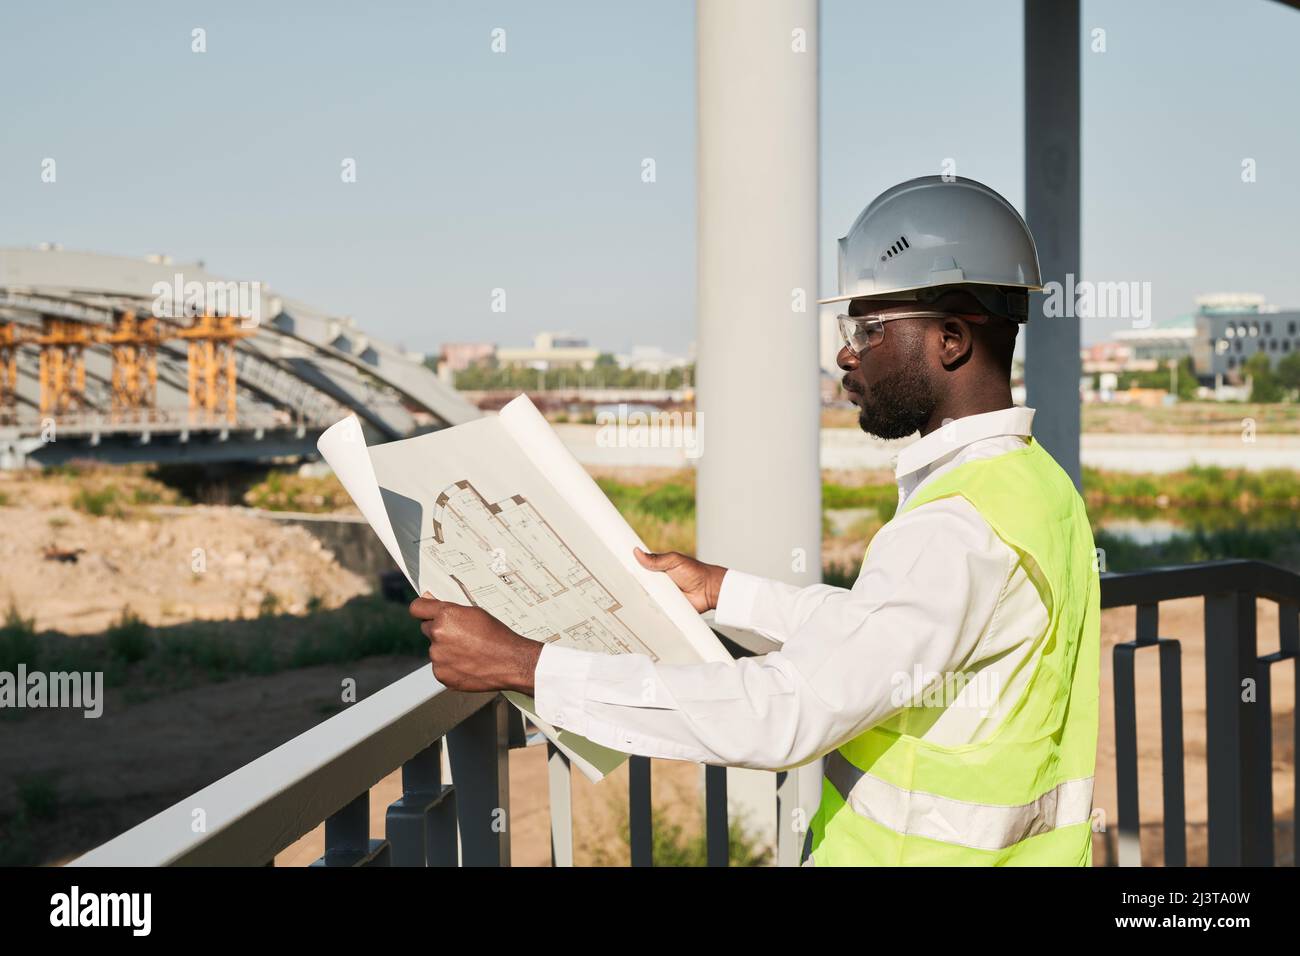 Engineer in hardhat and green vest viewing blueprint and standing on construction site Stock Photo